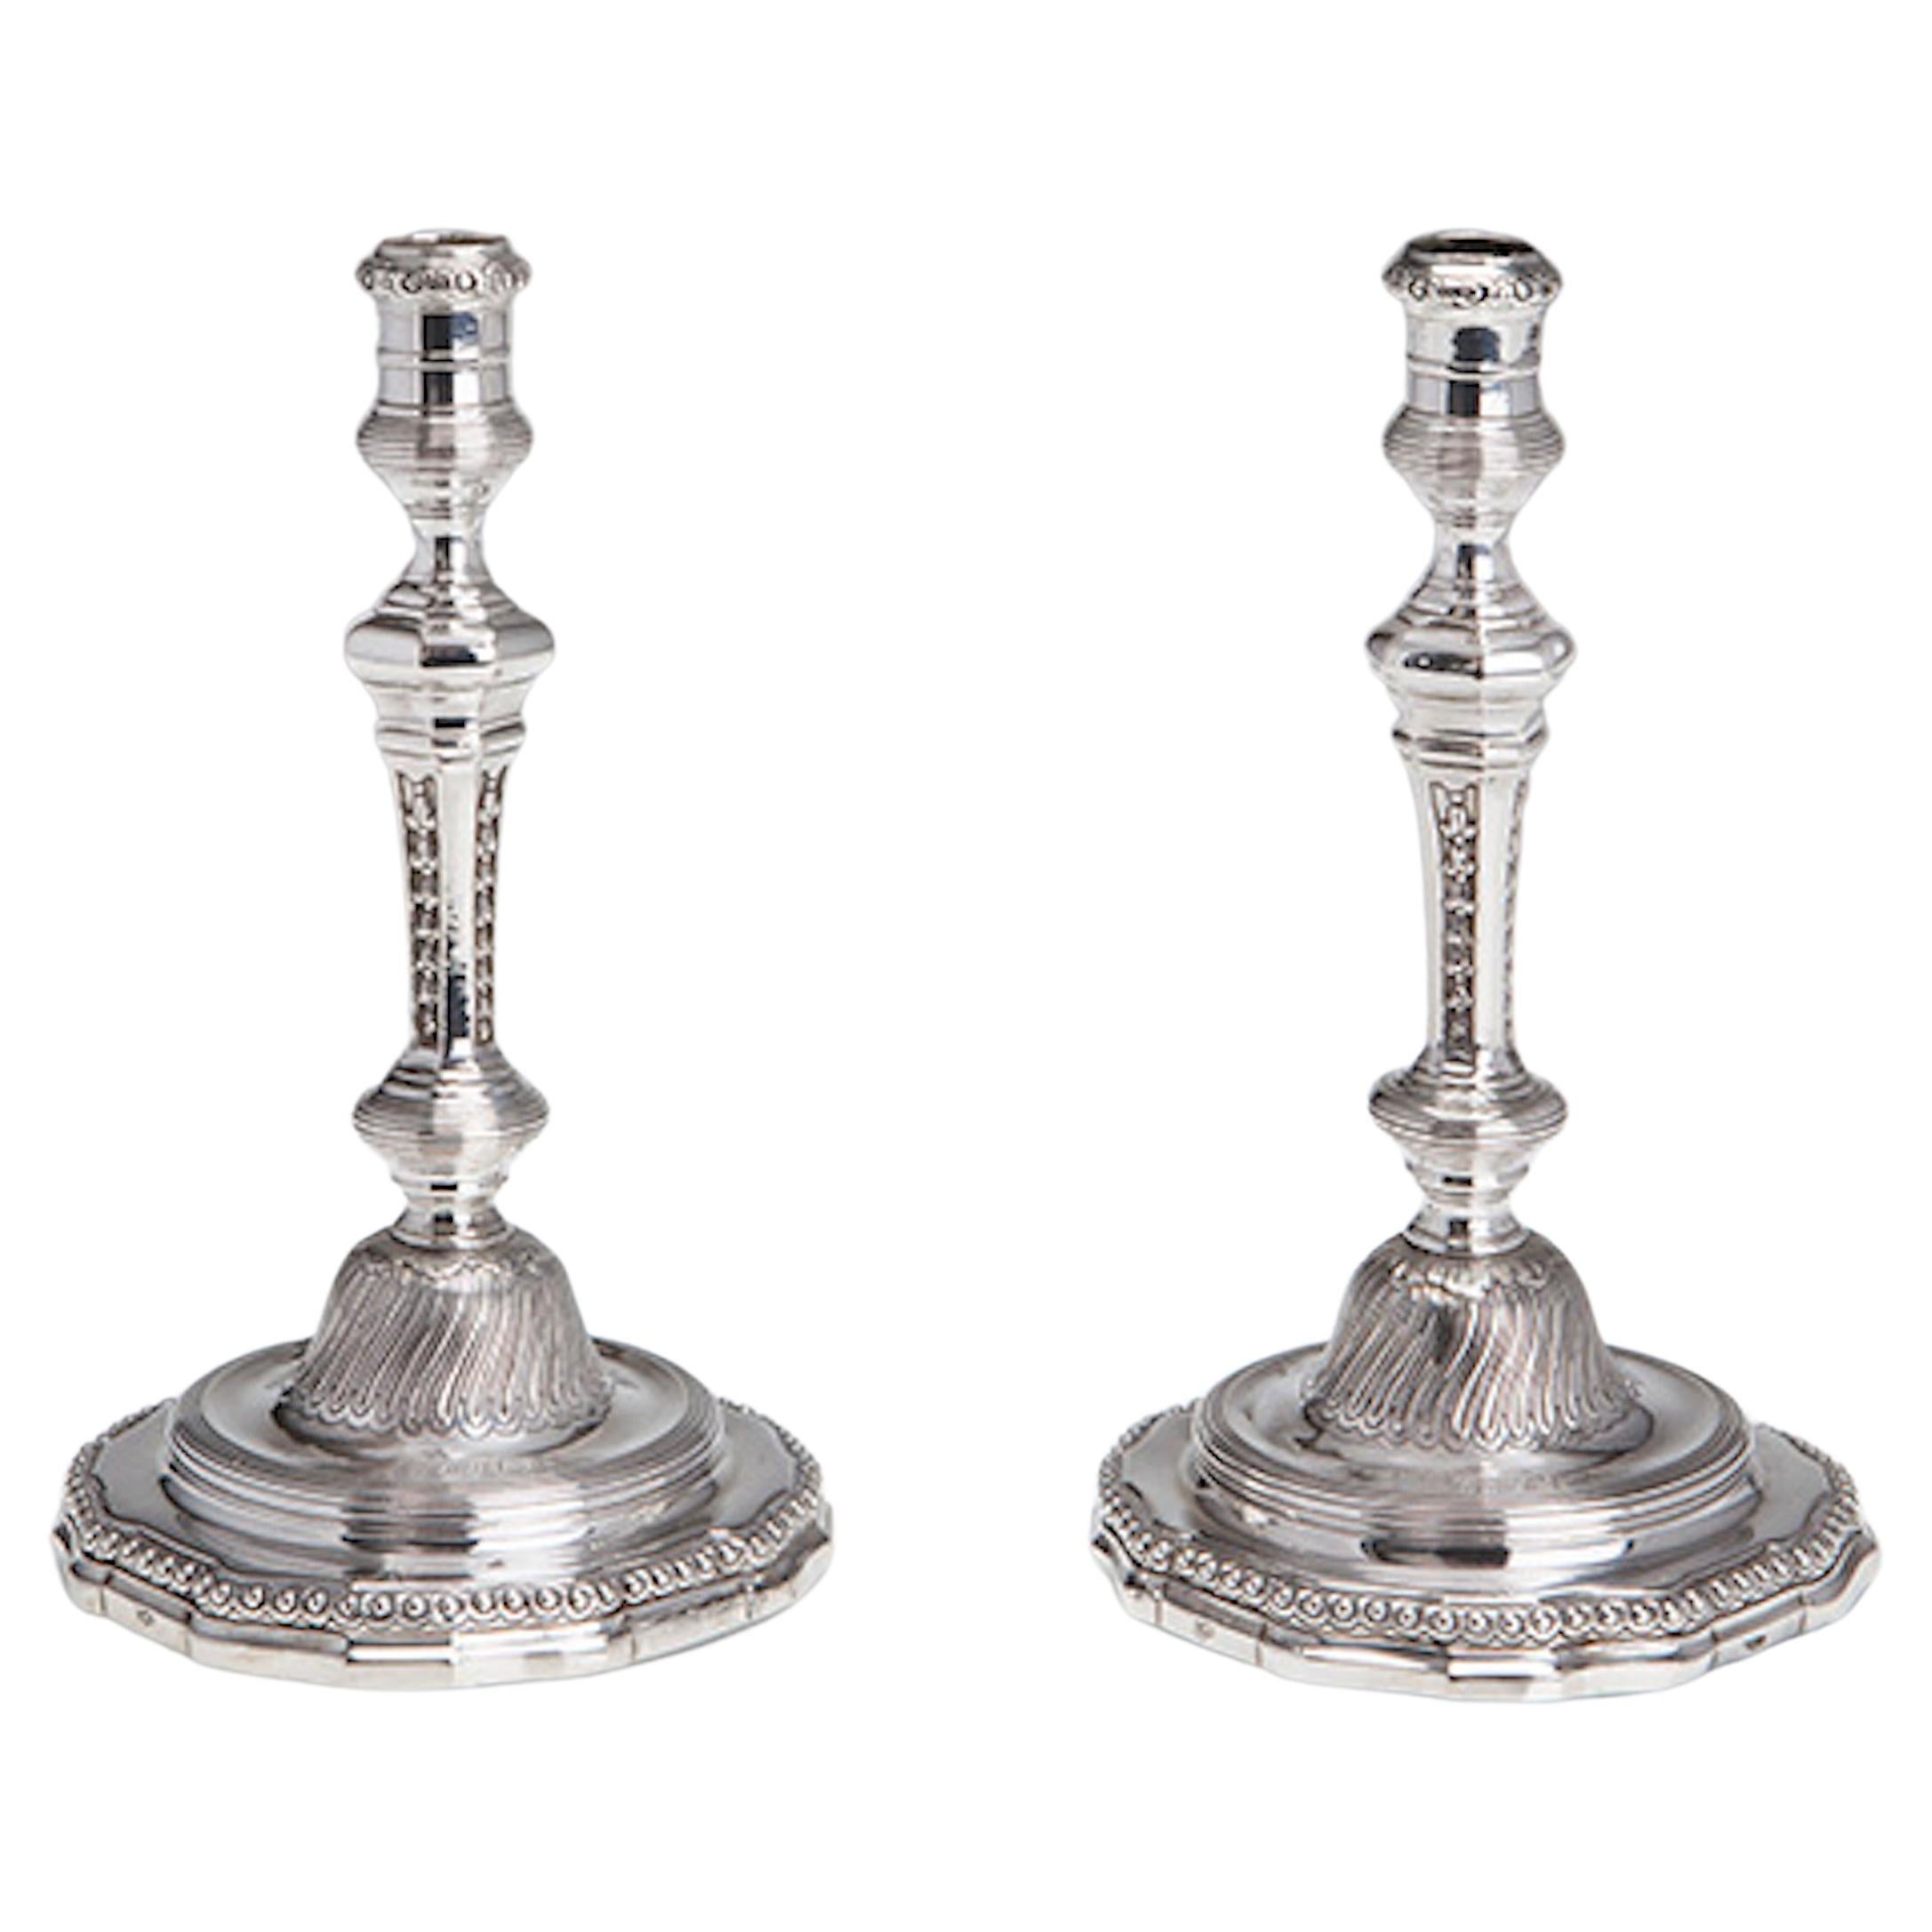 German Candlesticks from the Middle of the 18th Century with Marks For Sale